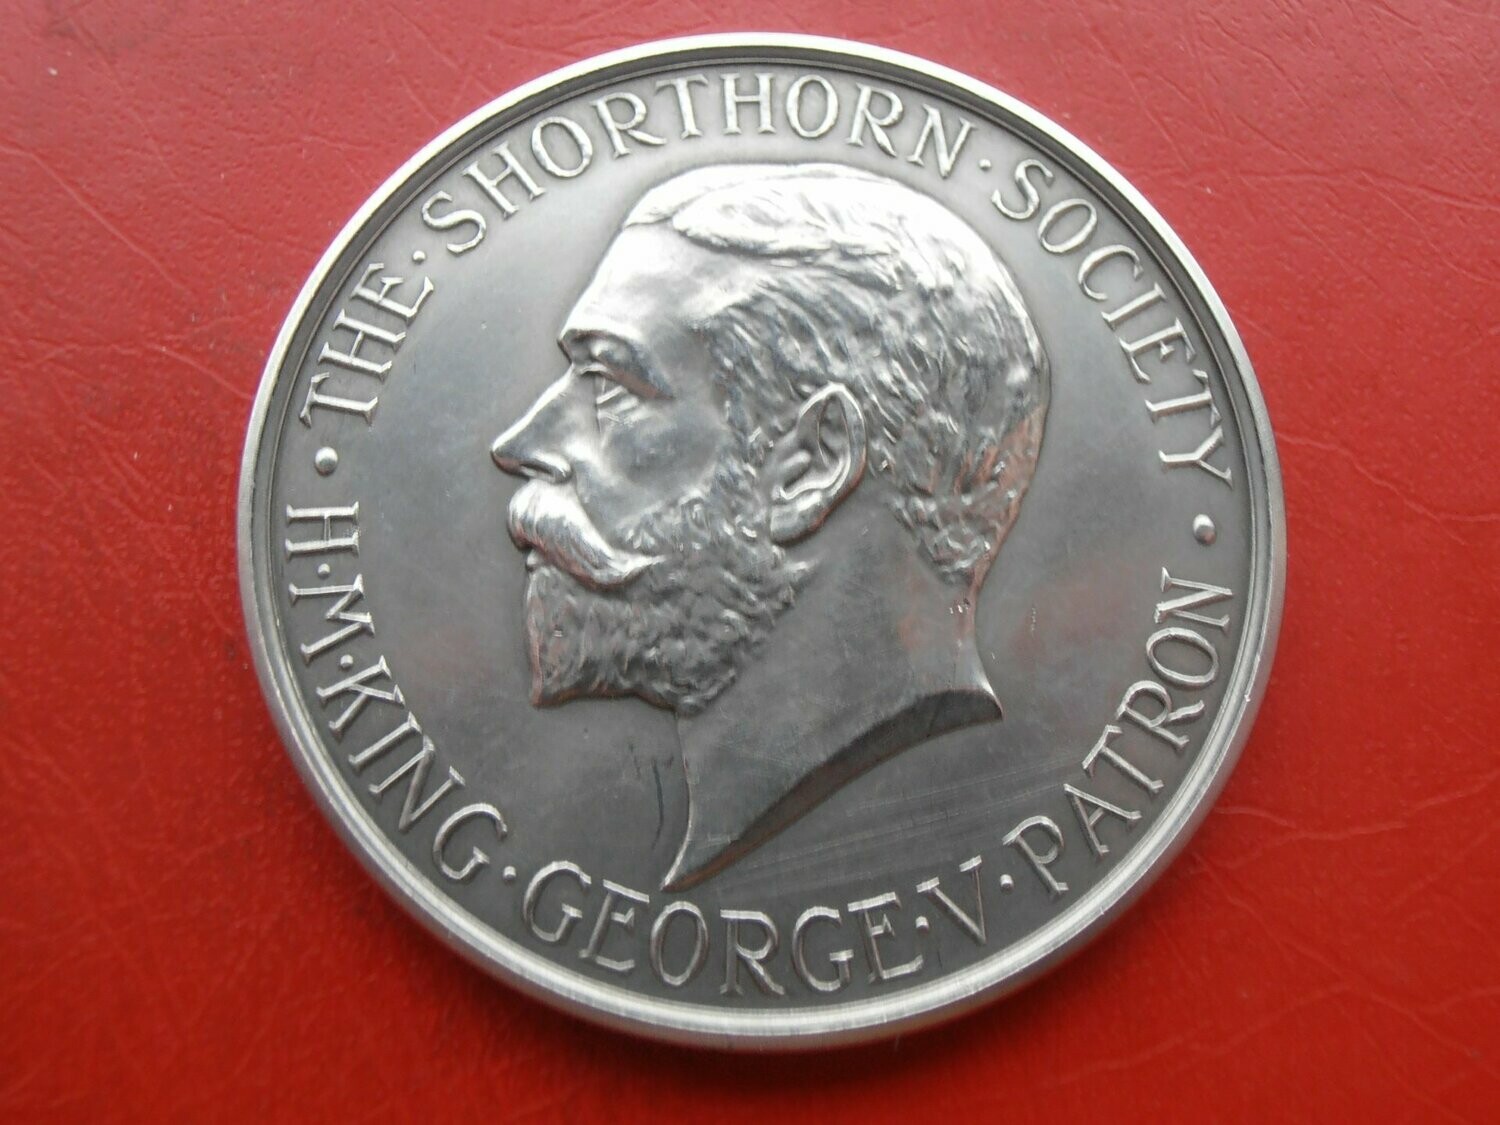 Border Union Agricultural Show Medal - 1920